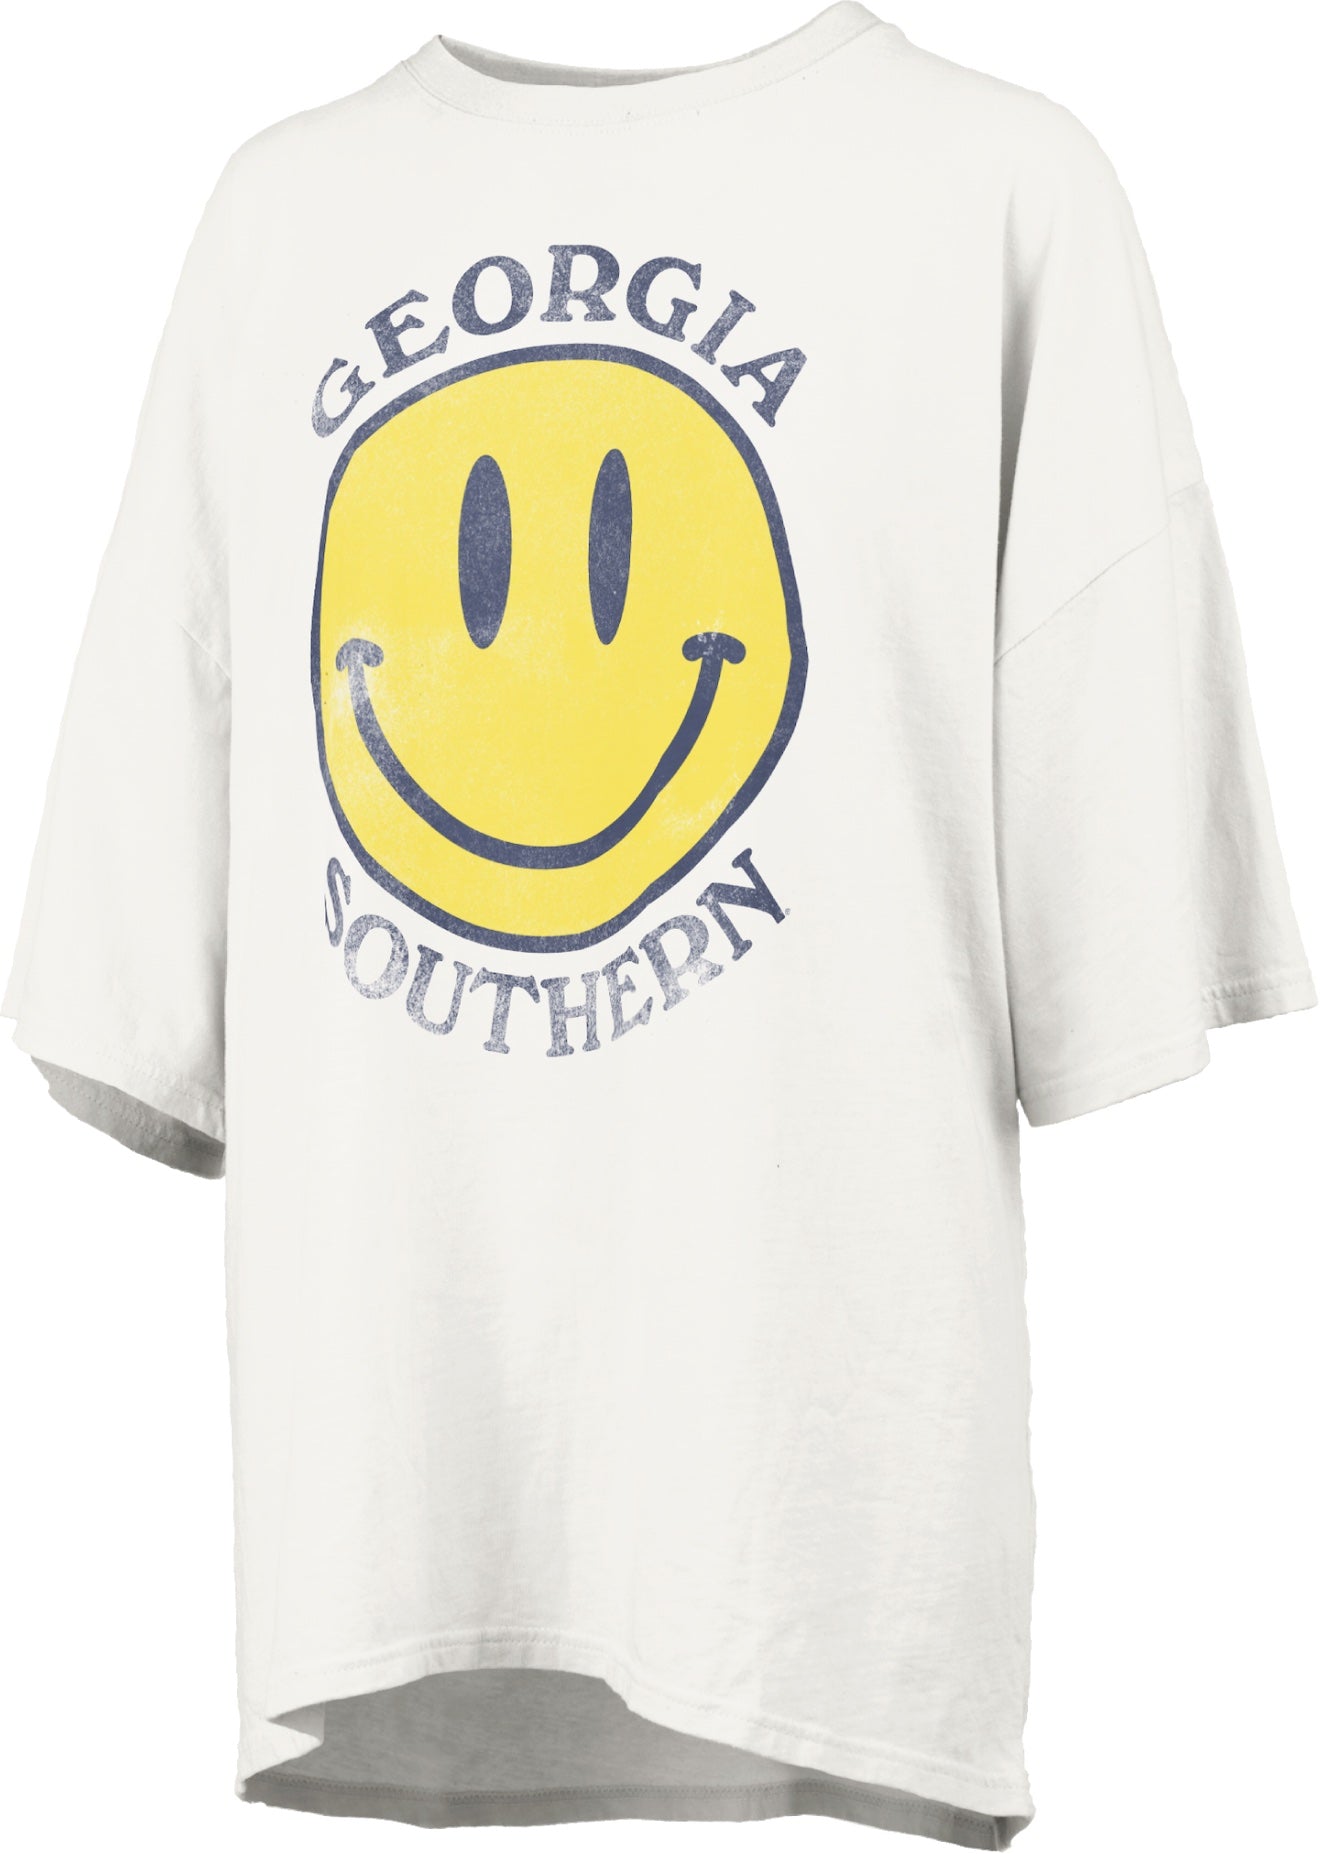 PRESSBOX Smiley Face - One Size Fits All (OSFA)